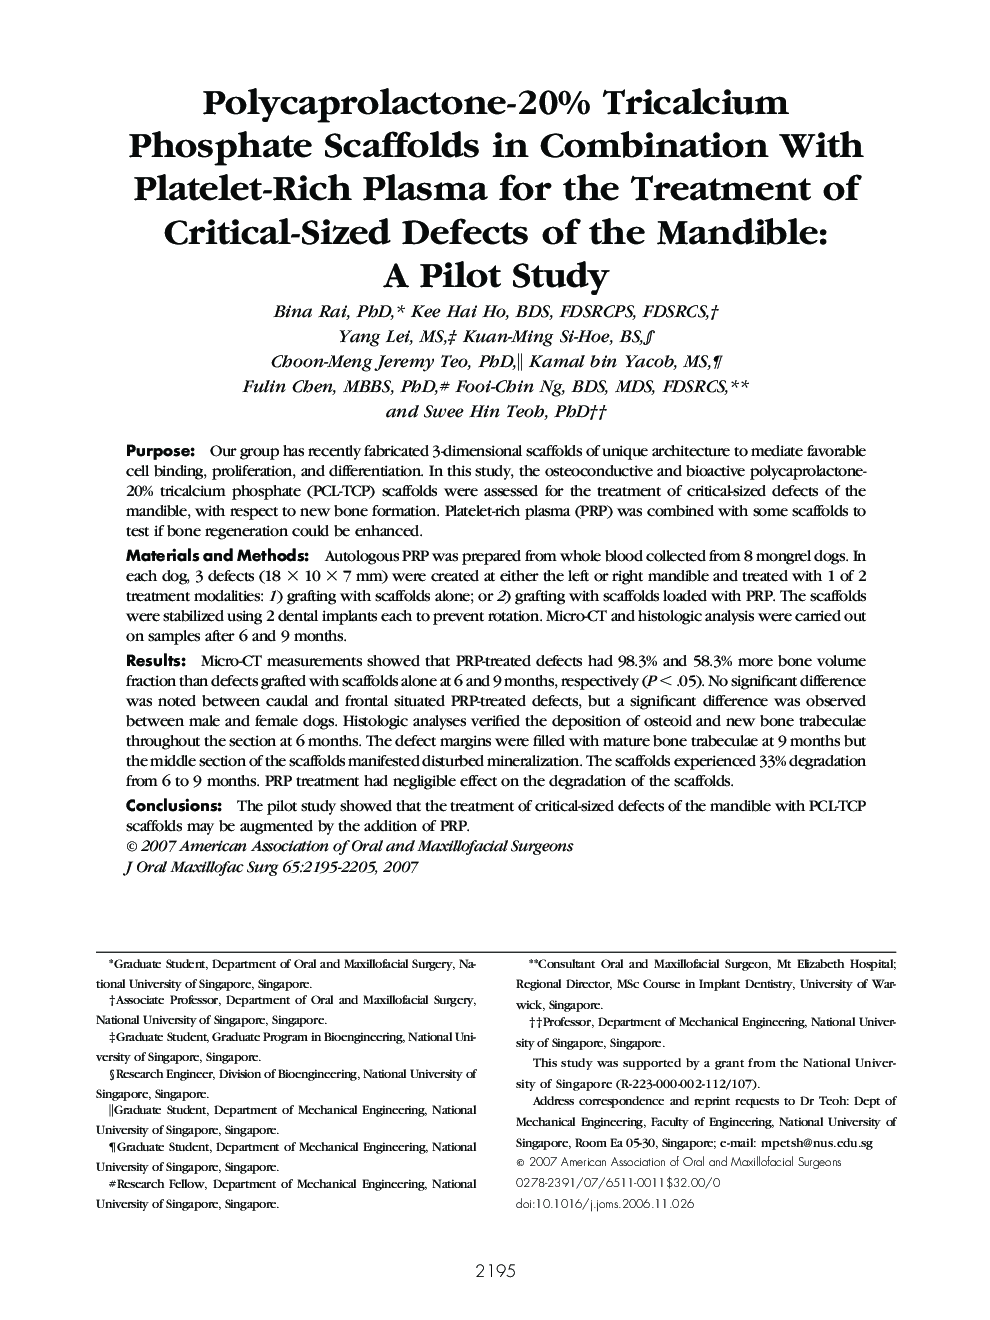 Polycaprolactone-20% Tricalcium Phosphate Scaffolds in Combination With Platelet-Rich Plasma for the Treatment of Critical-Sized Defects of the Mandible: A Pilot Study